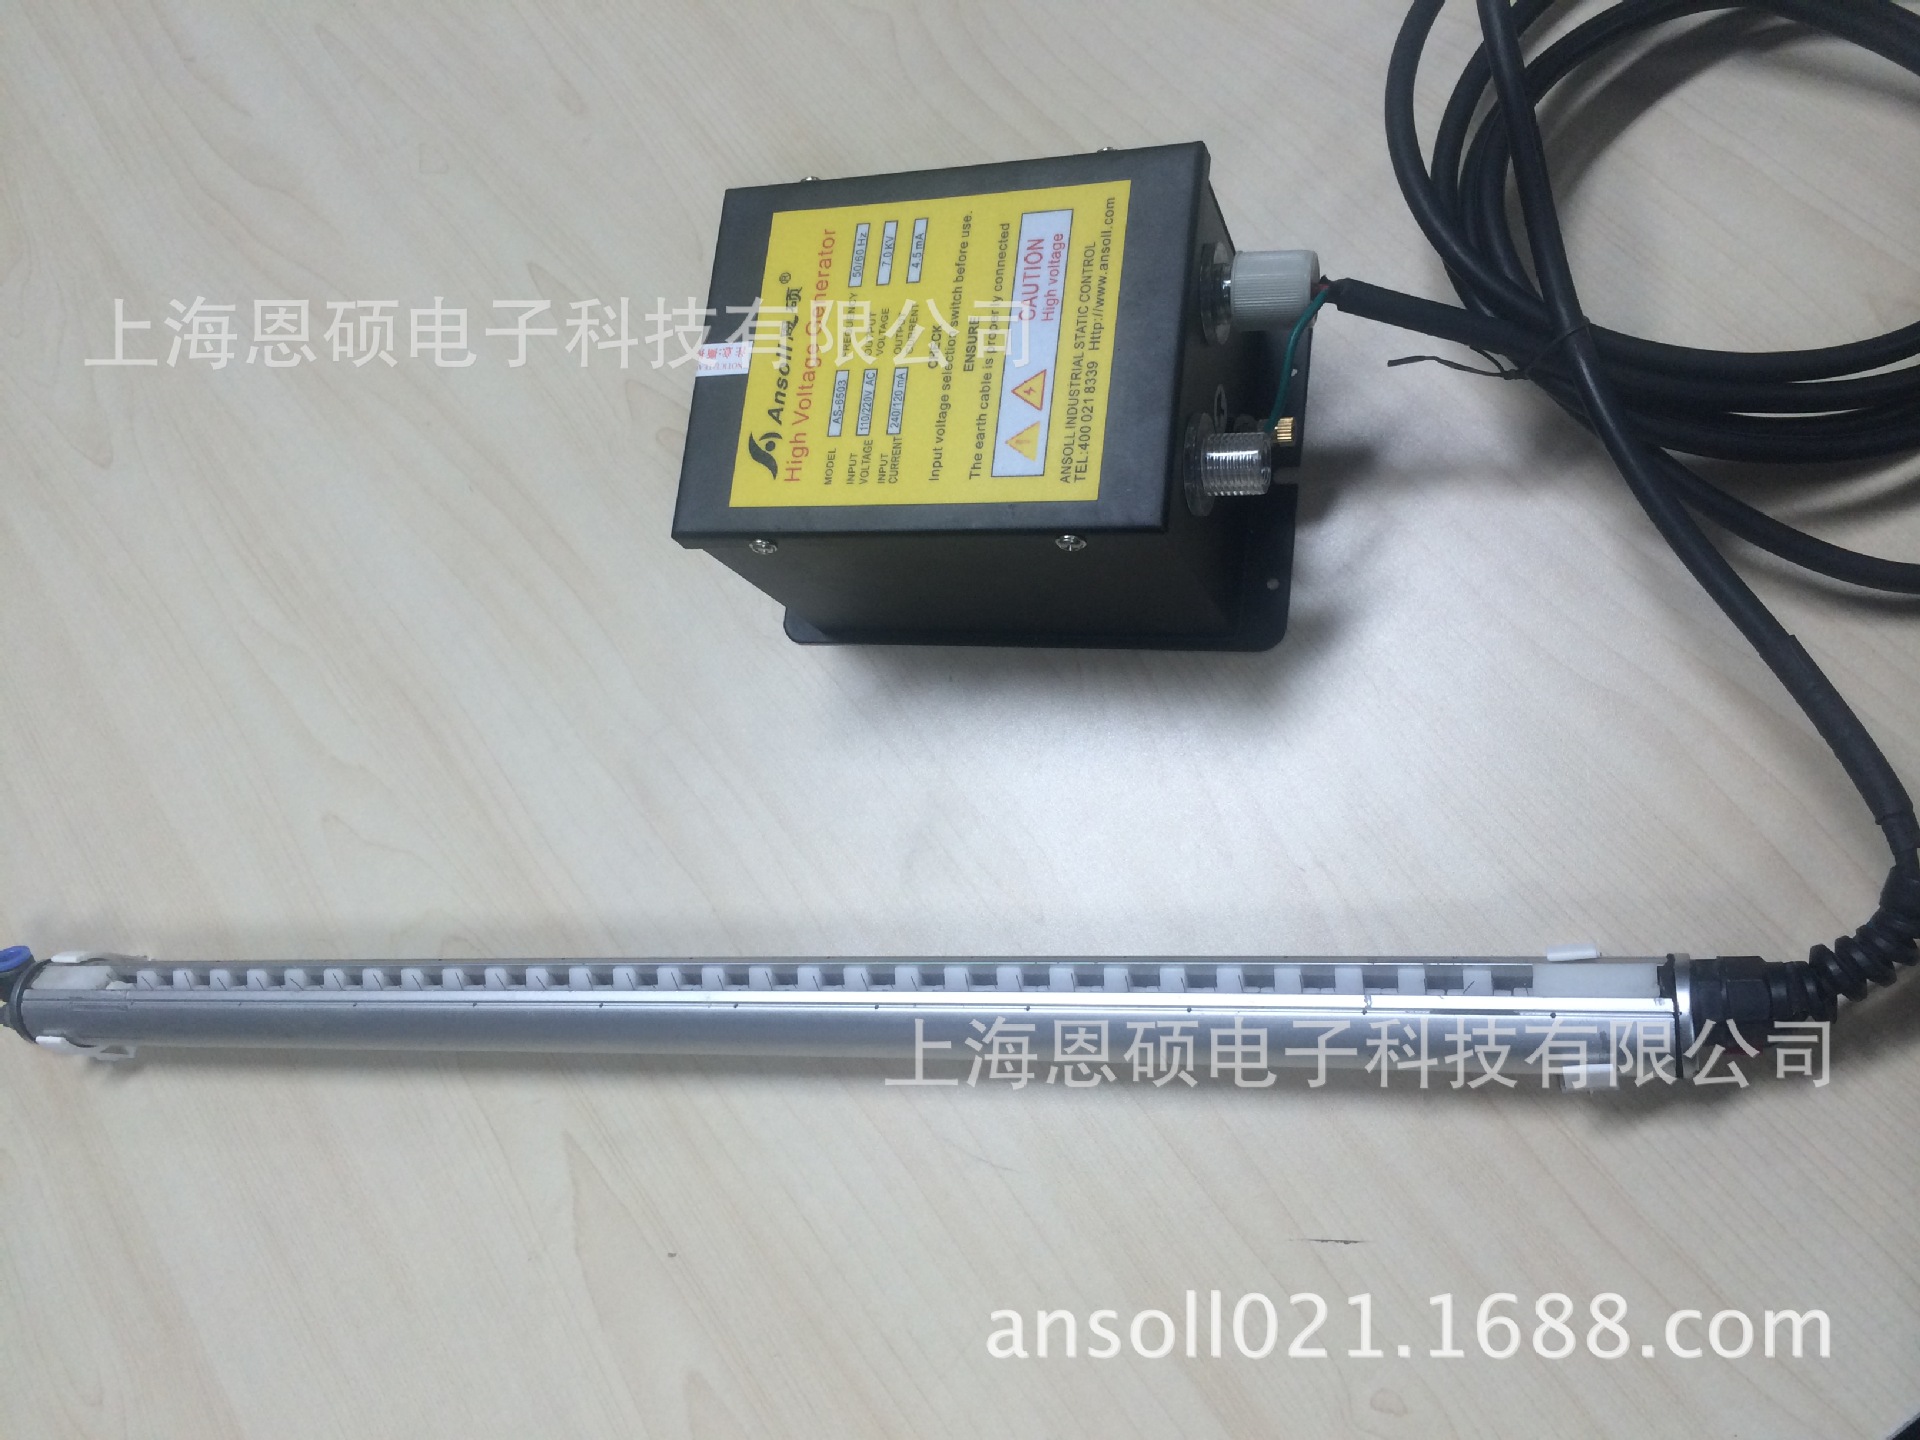 supply AS6401 Induction Static electricity Elimination rod Electrostatic generator,Ion air bar,Electrostatic removal device